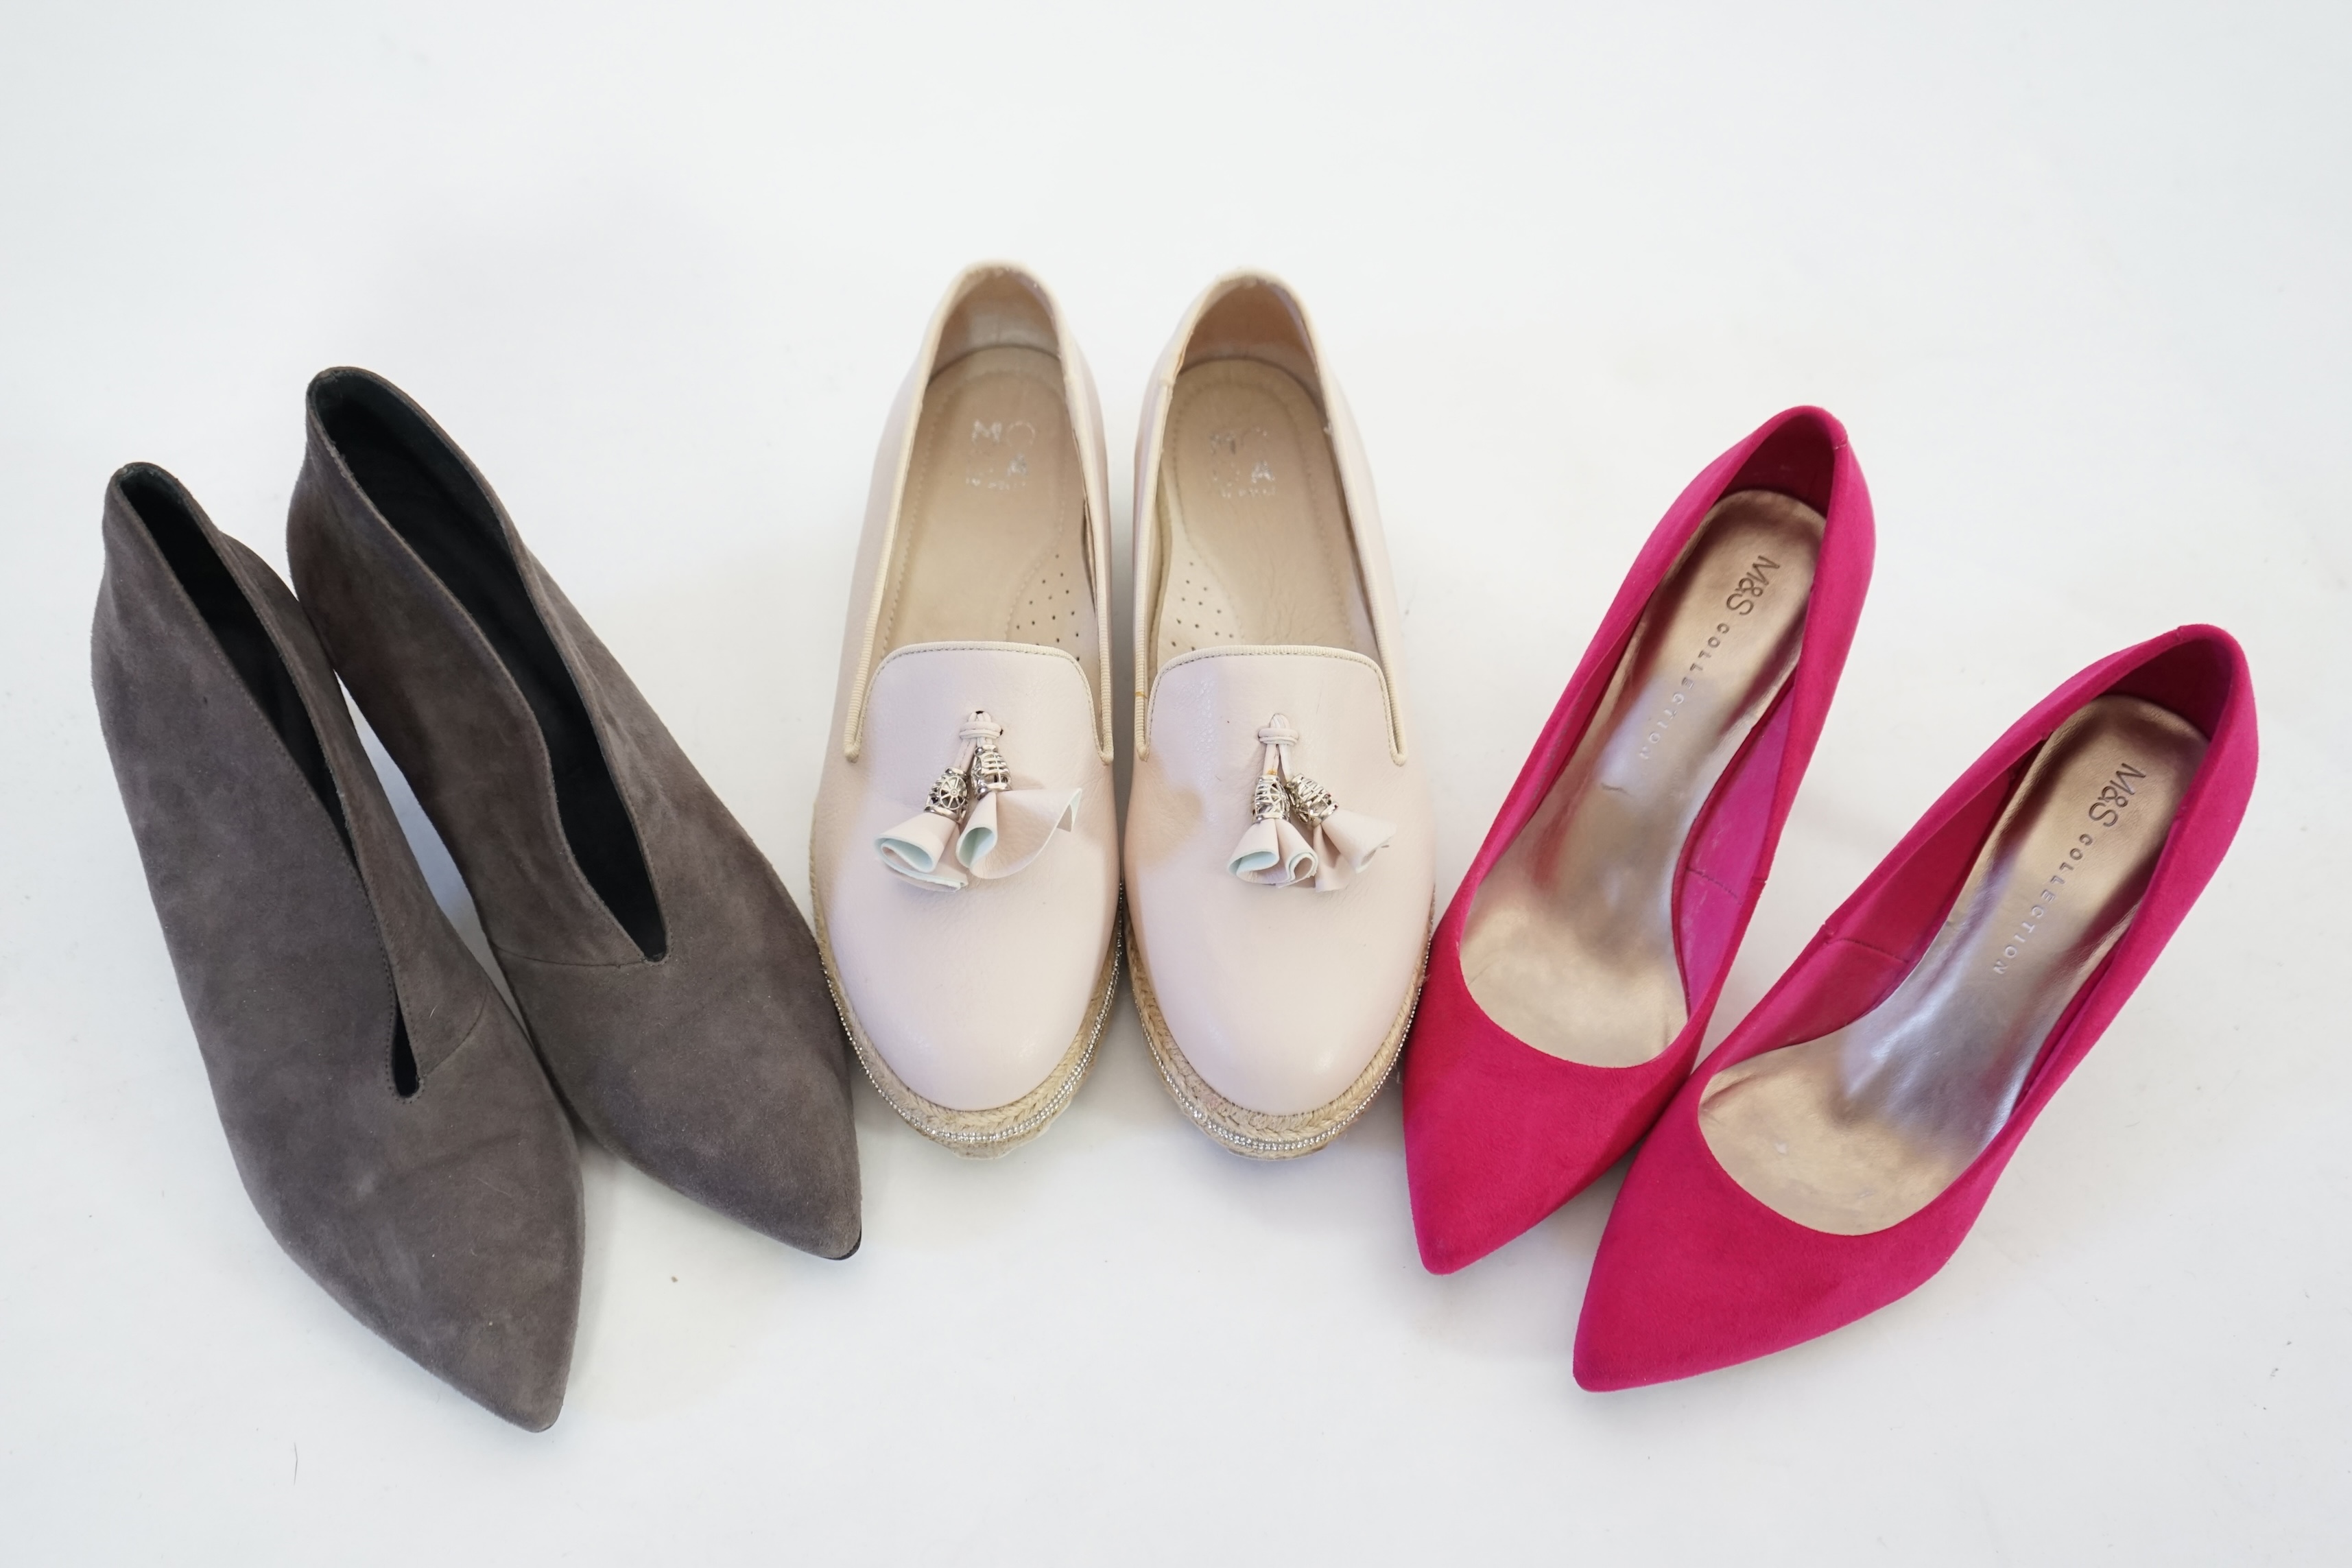 Three pairs of lady's shoes, Jigsaw V front shoe boot size 39, Marks & Spencer bright pink suede size 5.5 and a pair of Moda in Pelle buff platformed flats with metallic silver strip through sole. Proceeds to Happy Paws